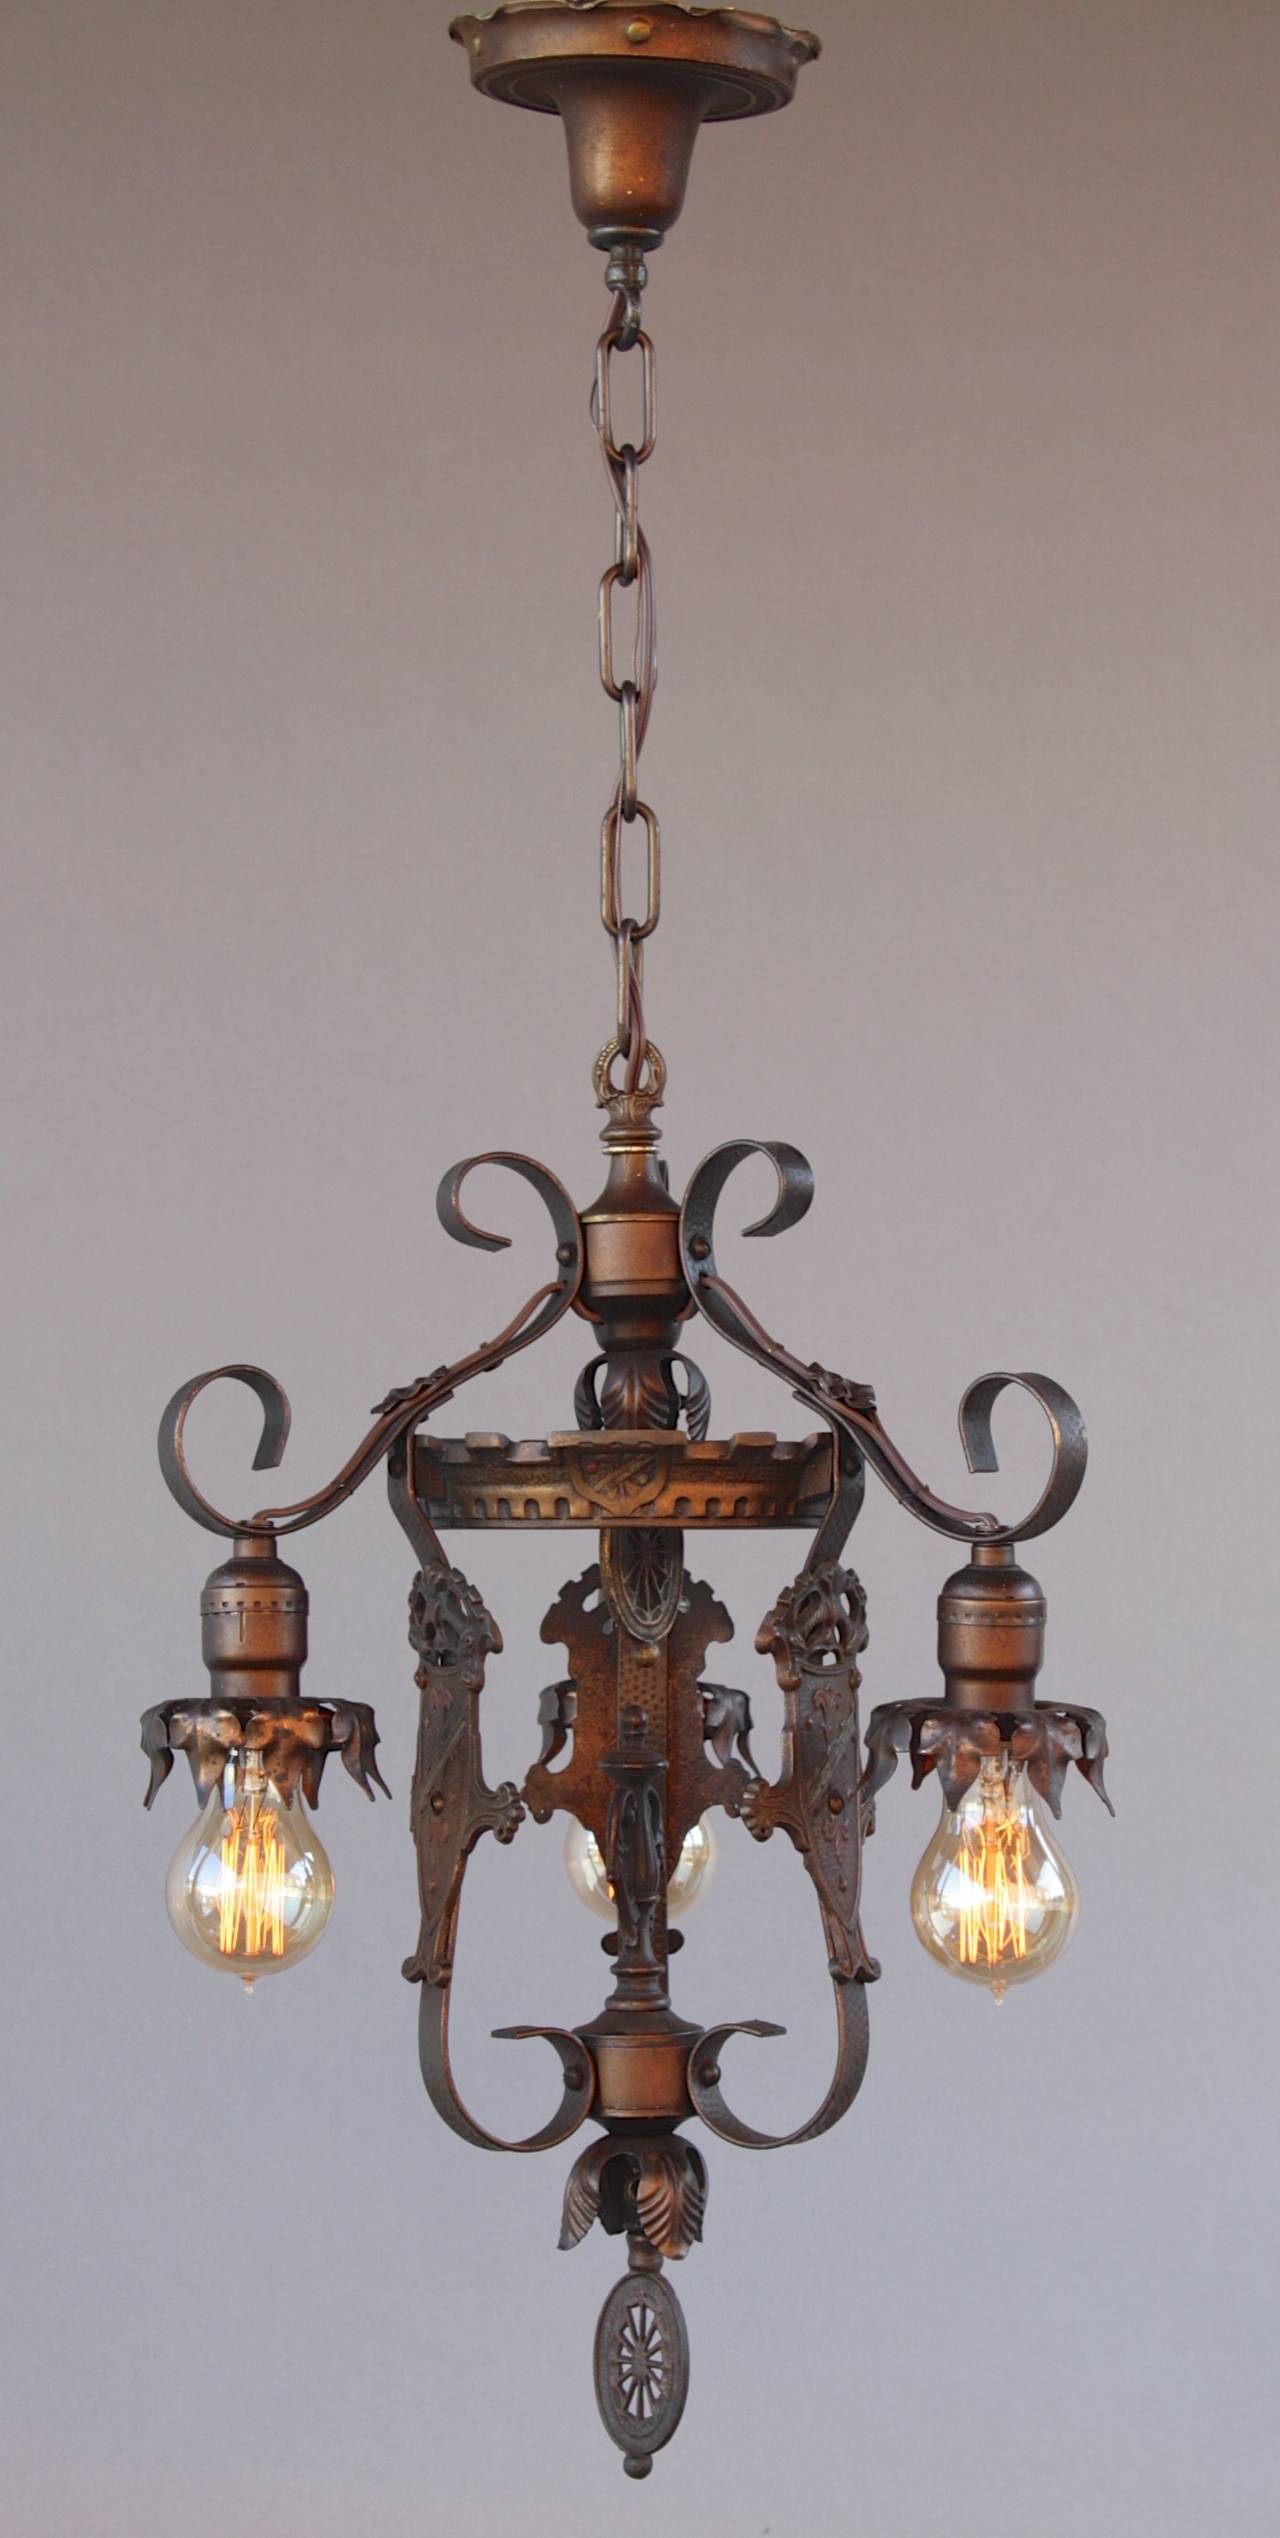 Nicely styled 1920s chandelier with three downlights and original polychrome finish. Measures 13 3/4